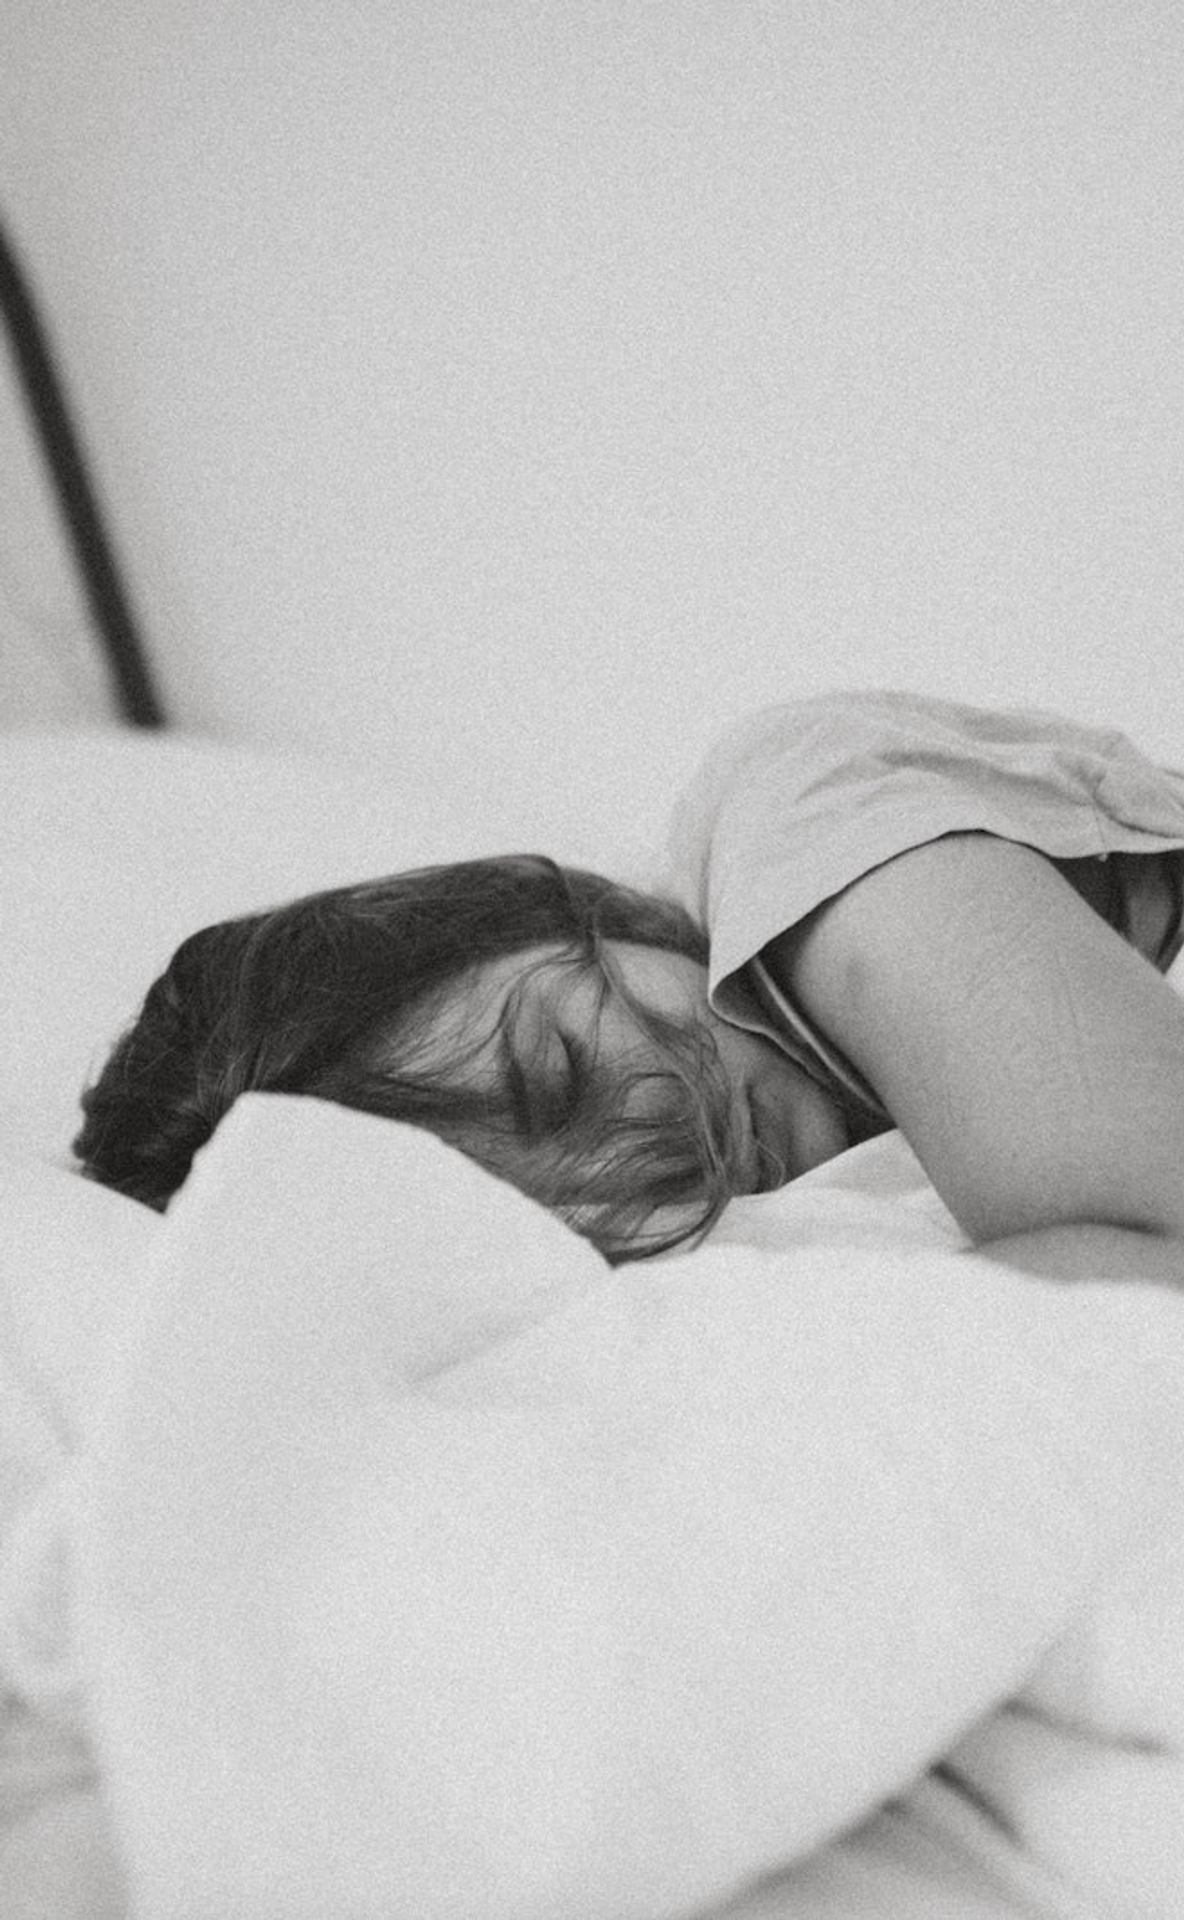 Everything To Know About Pregnancy Sleeping Positions, 'Cause You Need  Those Zzzs